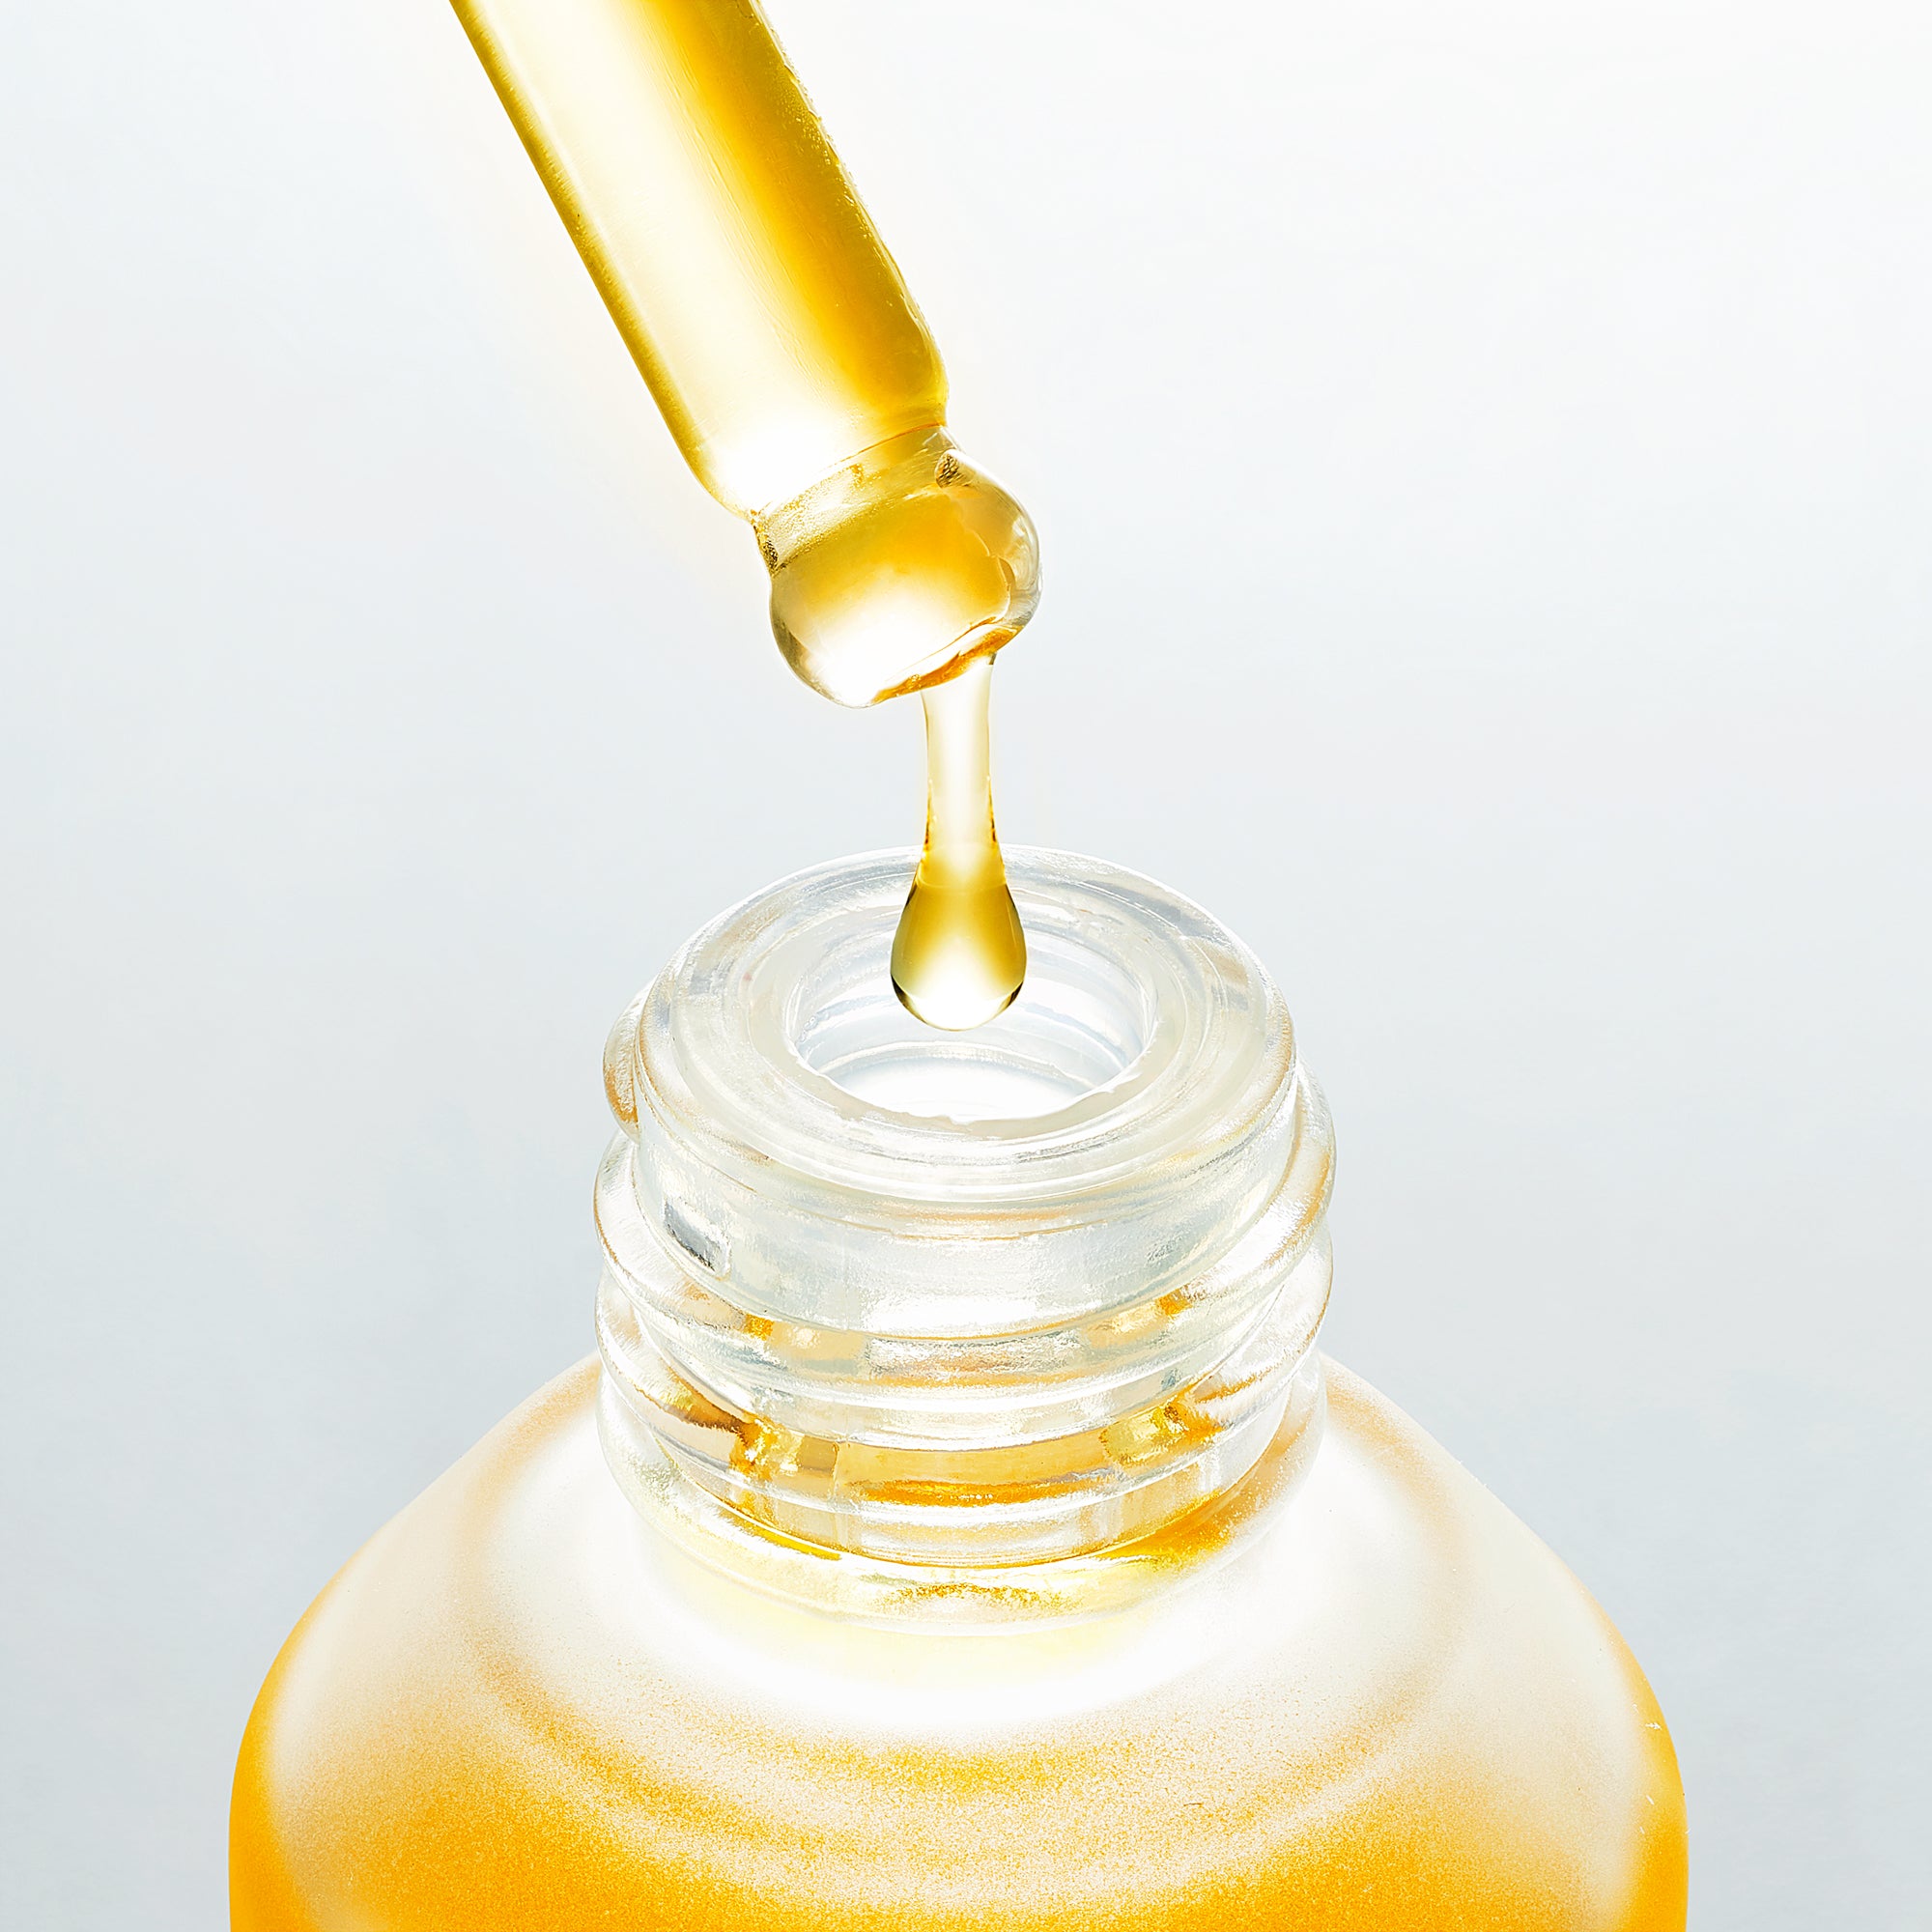 Natural Honey Extract Oil Soluble 2 oz